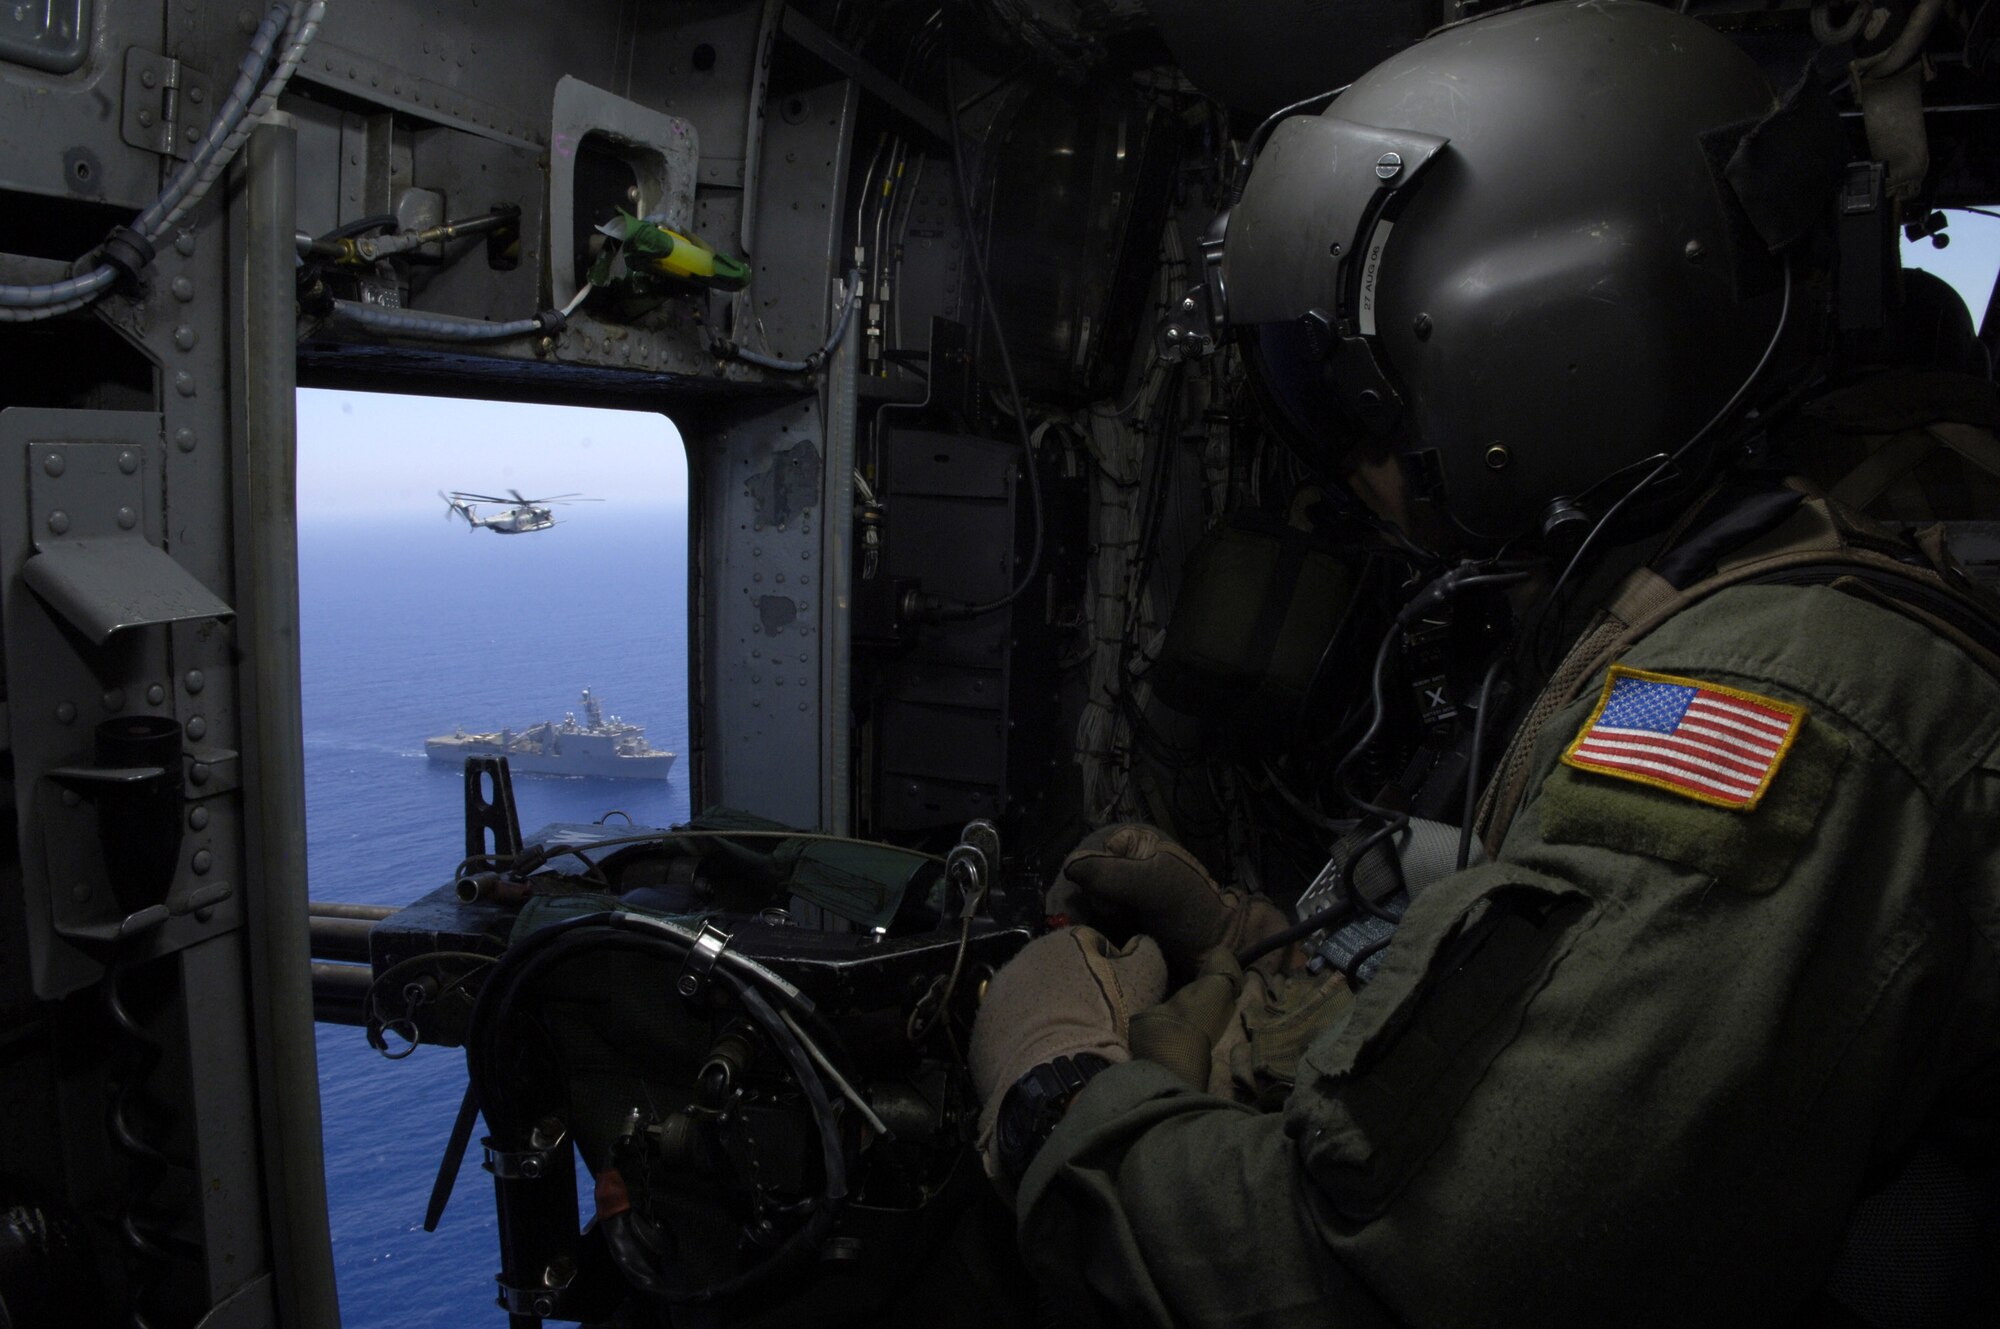 Tech. Sgt. John Stott looks out the left side of his MH-53M Pave Low helicopter as it escorts a Marine CH-53 Sea Stallion transporting Secretary of State Condoleezza Rice from Cyprus to the U.S. Embassy in Beirut, Lebanon, July 24.  Sergeant Stott is part of the 352nd Special Operations Group, Royal Air Force Mildenhall, deployed to Cyprus to help transport Americans who are voluntarily departing Lebanon.  (U.S. Air Force photo/Senior Airman Brian Ferguson) 